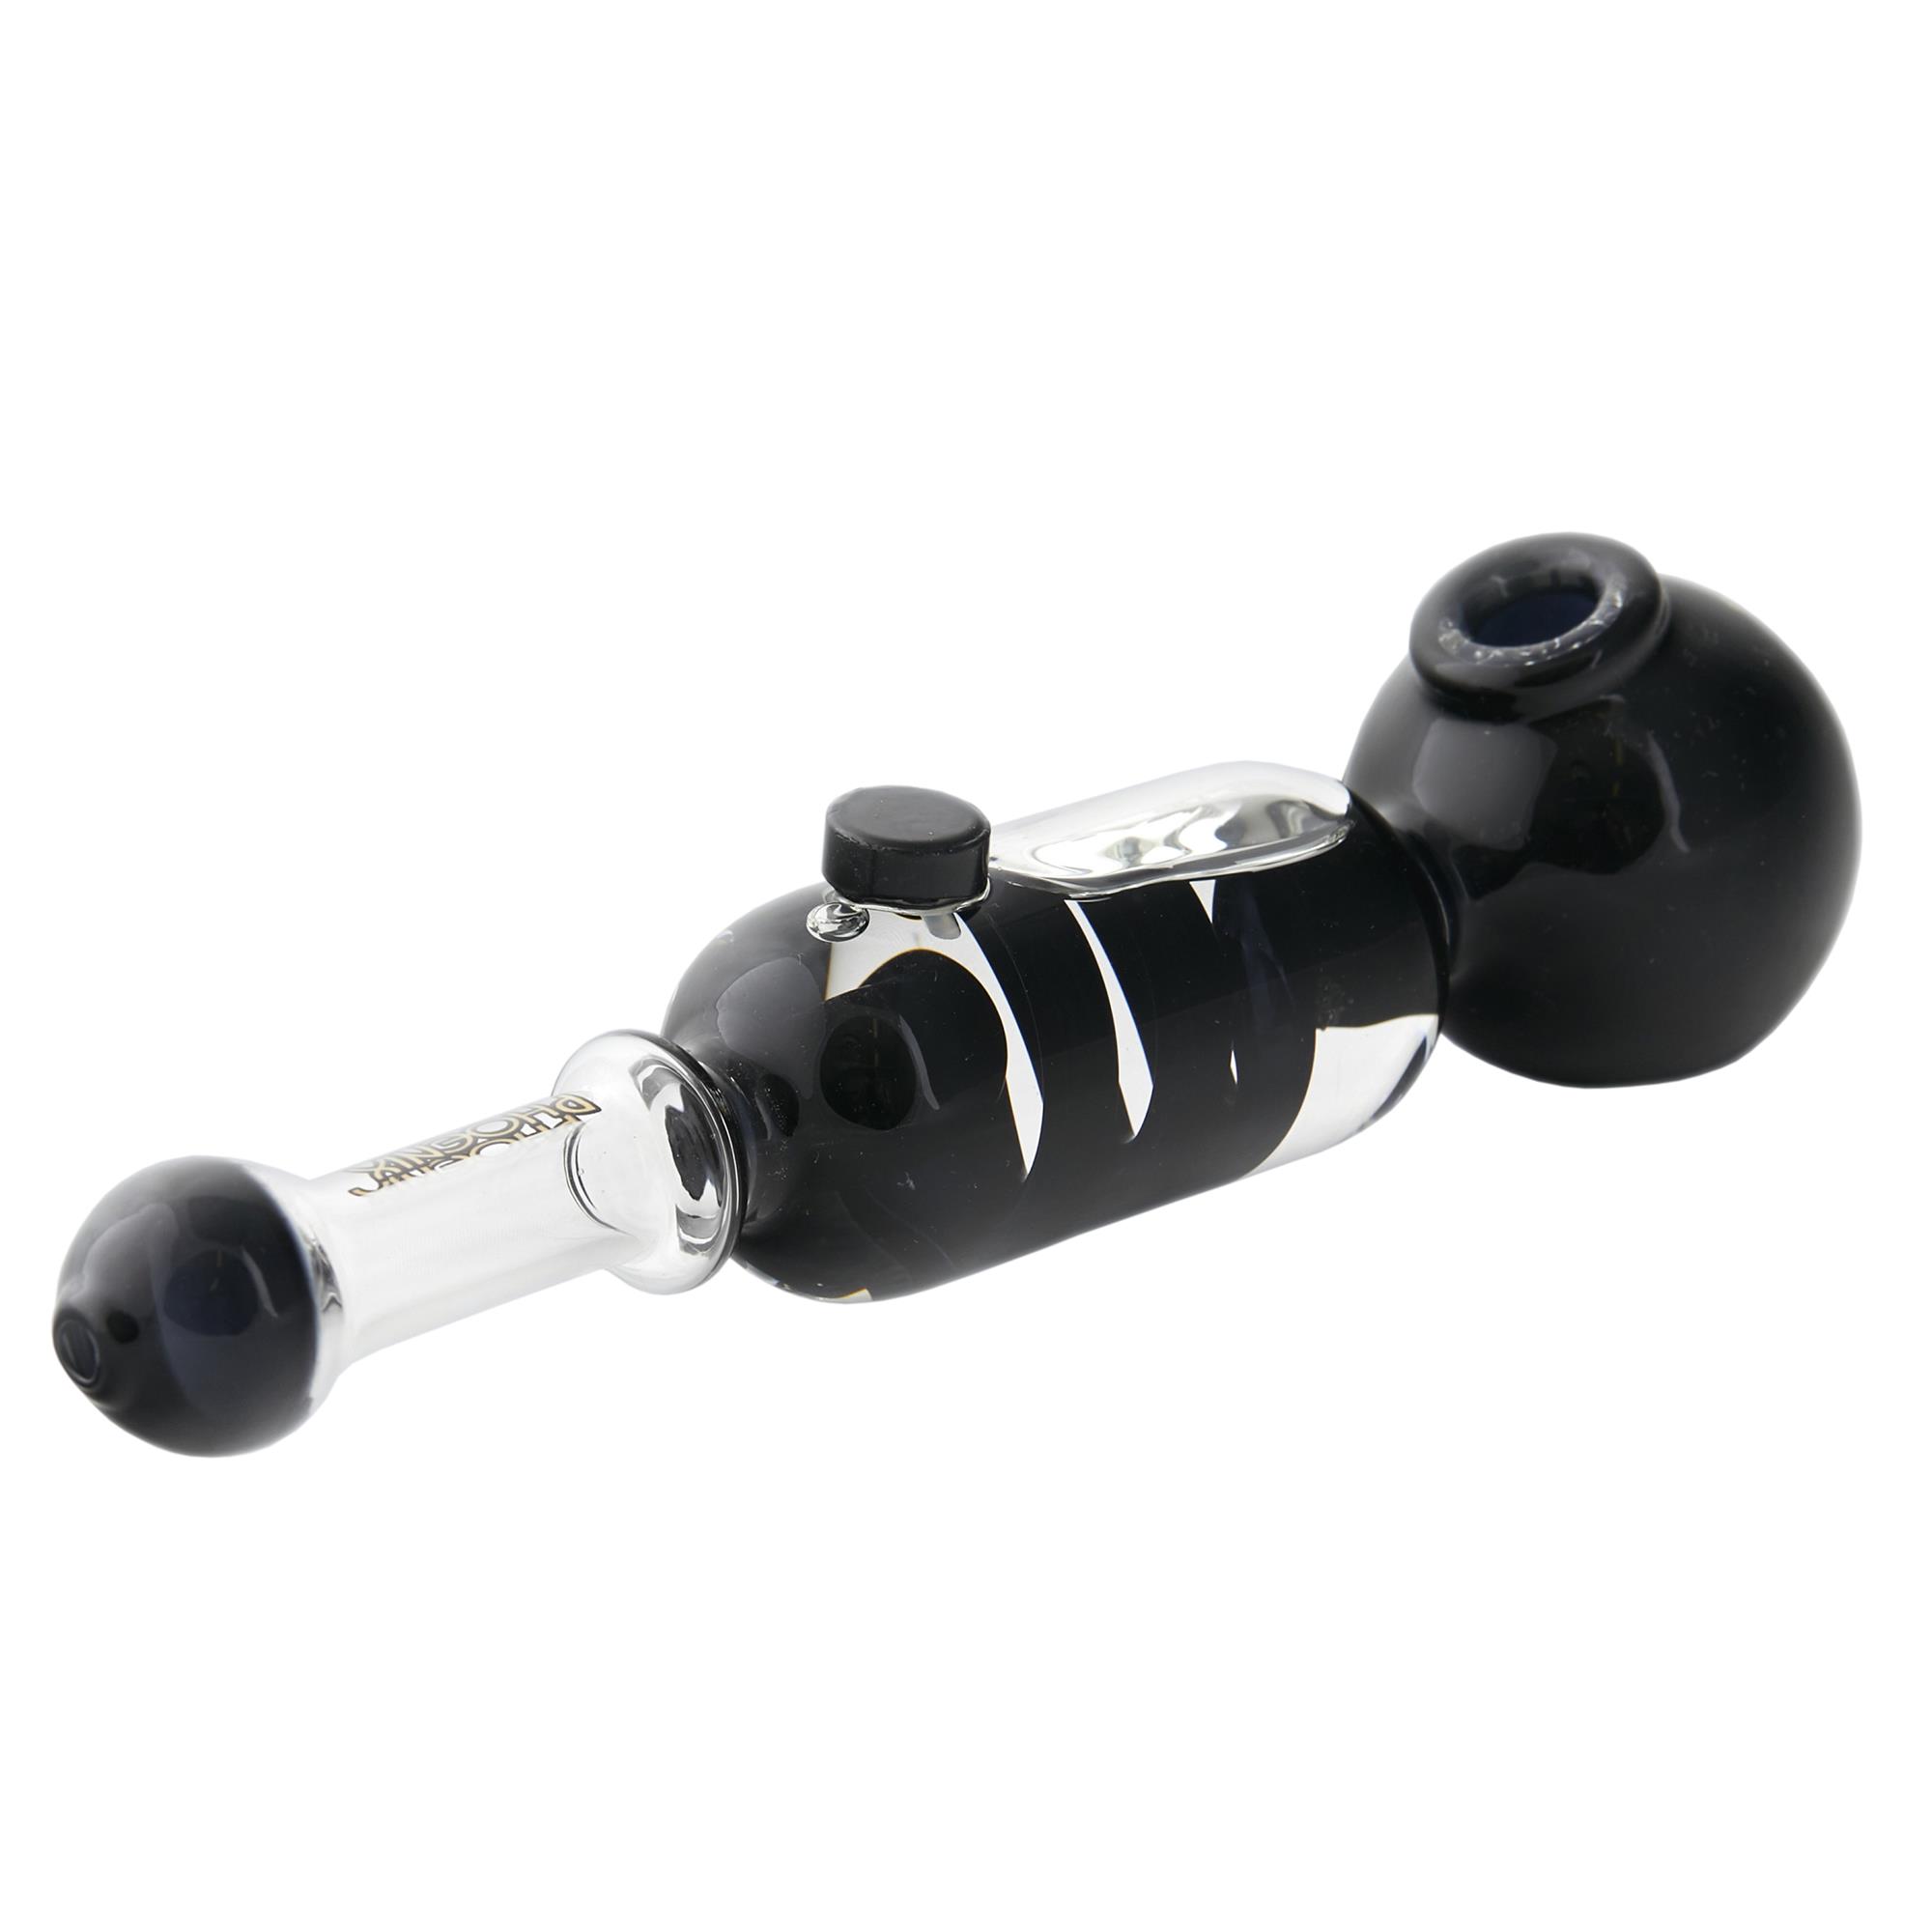 BLACK AND CLEAR GLYCOL SPIRAL SPOON PIPE